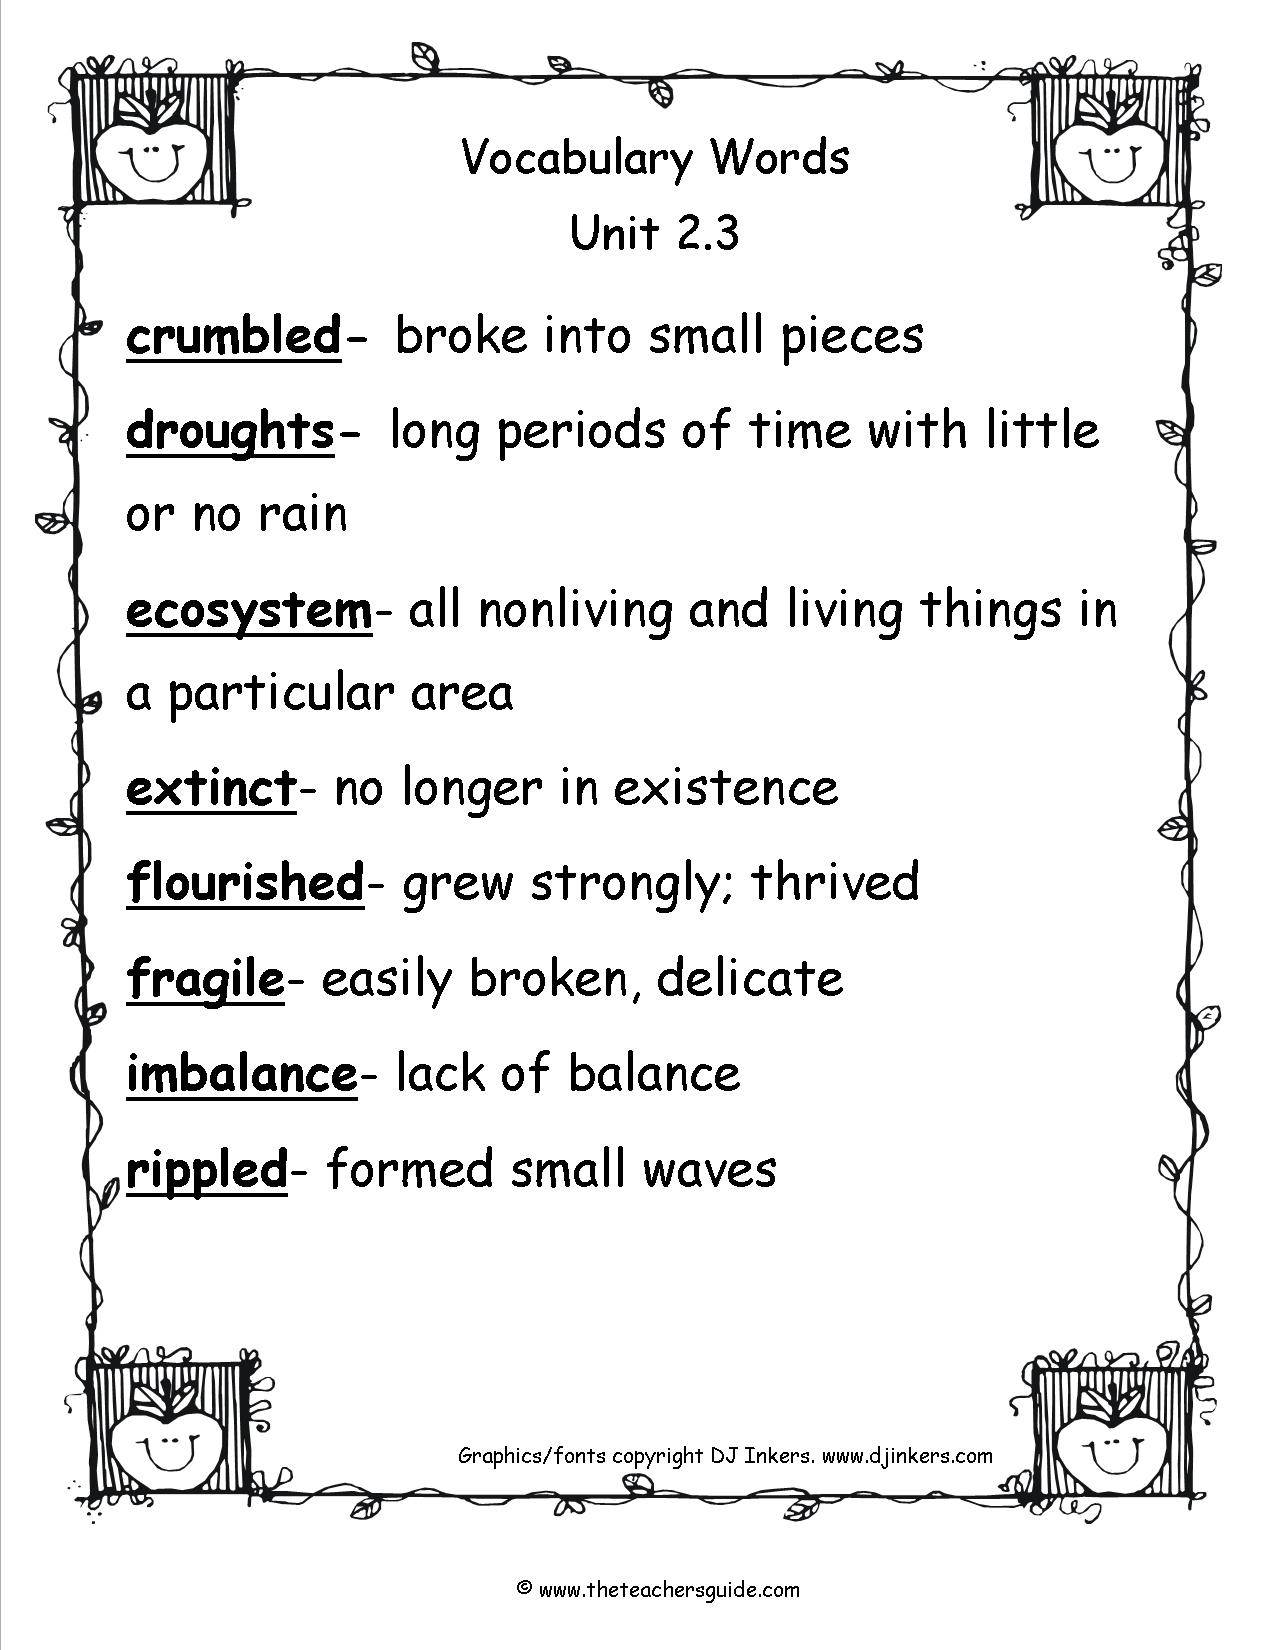 pauline-jakobsen-make-your-spelling-word-activities-for-fourth-grade-a